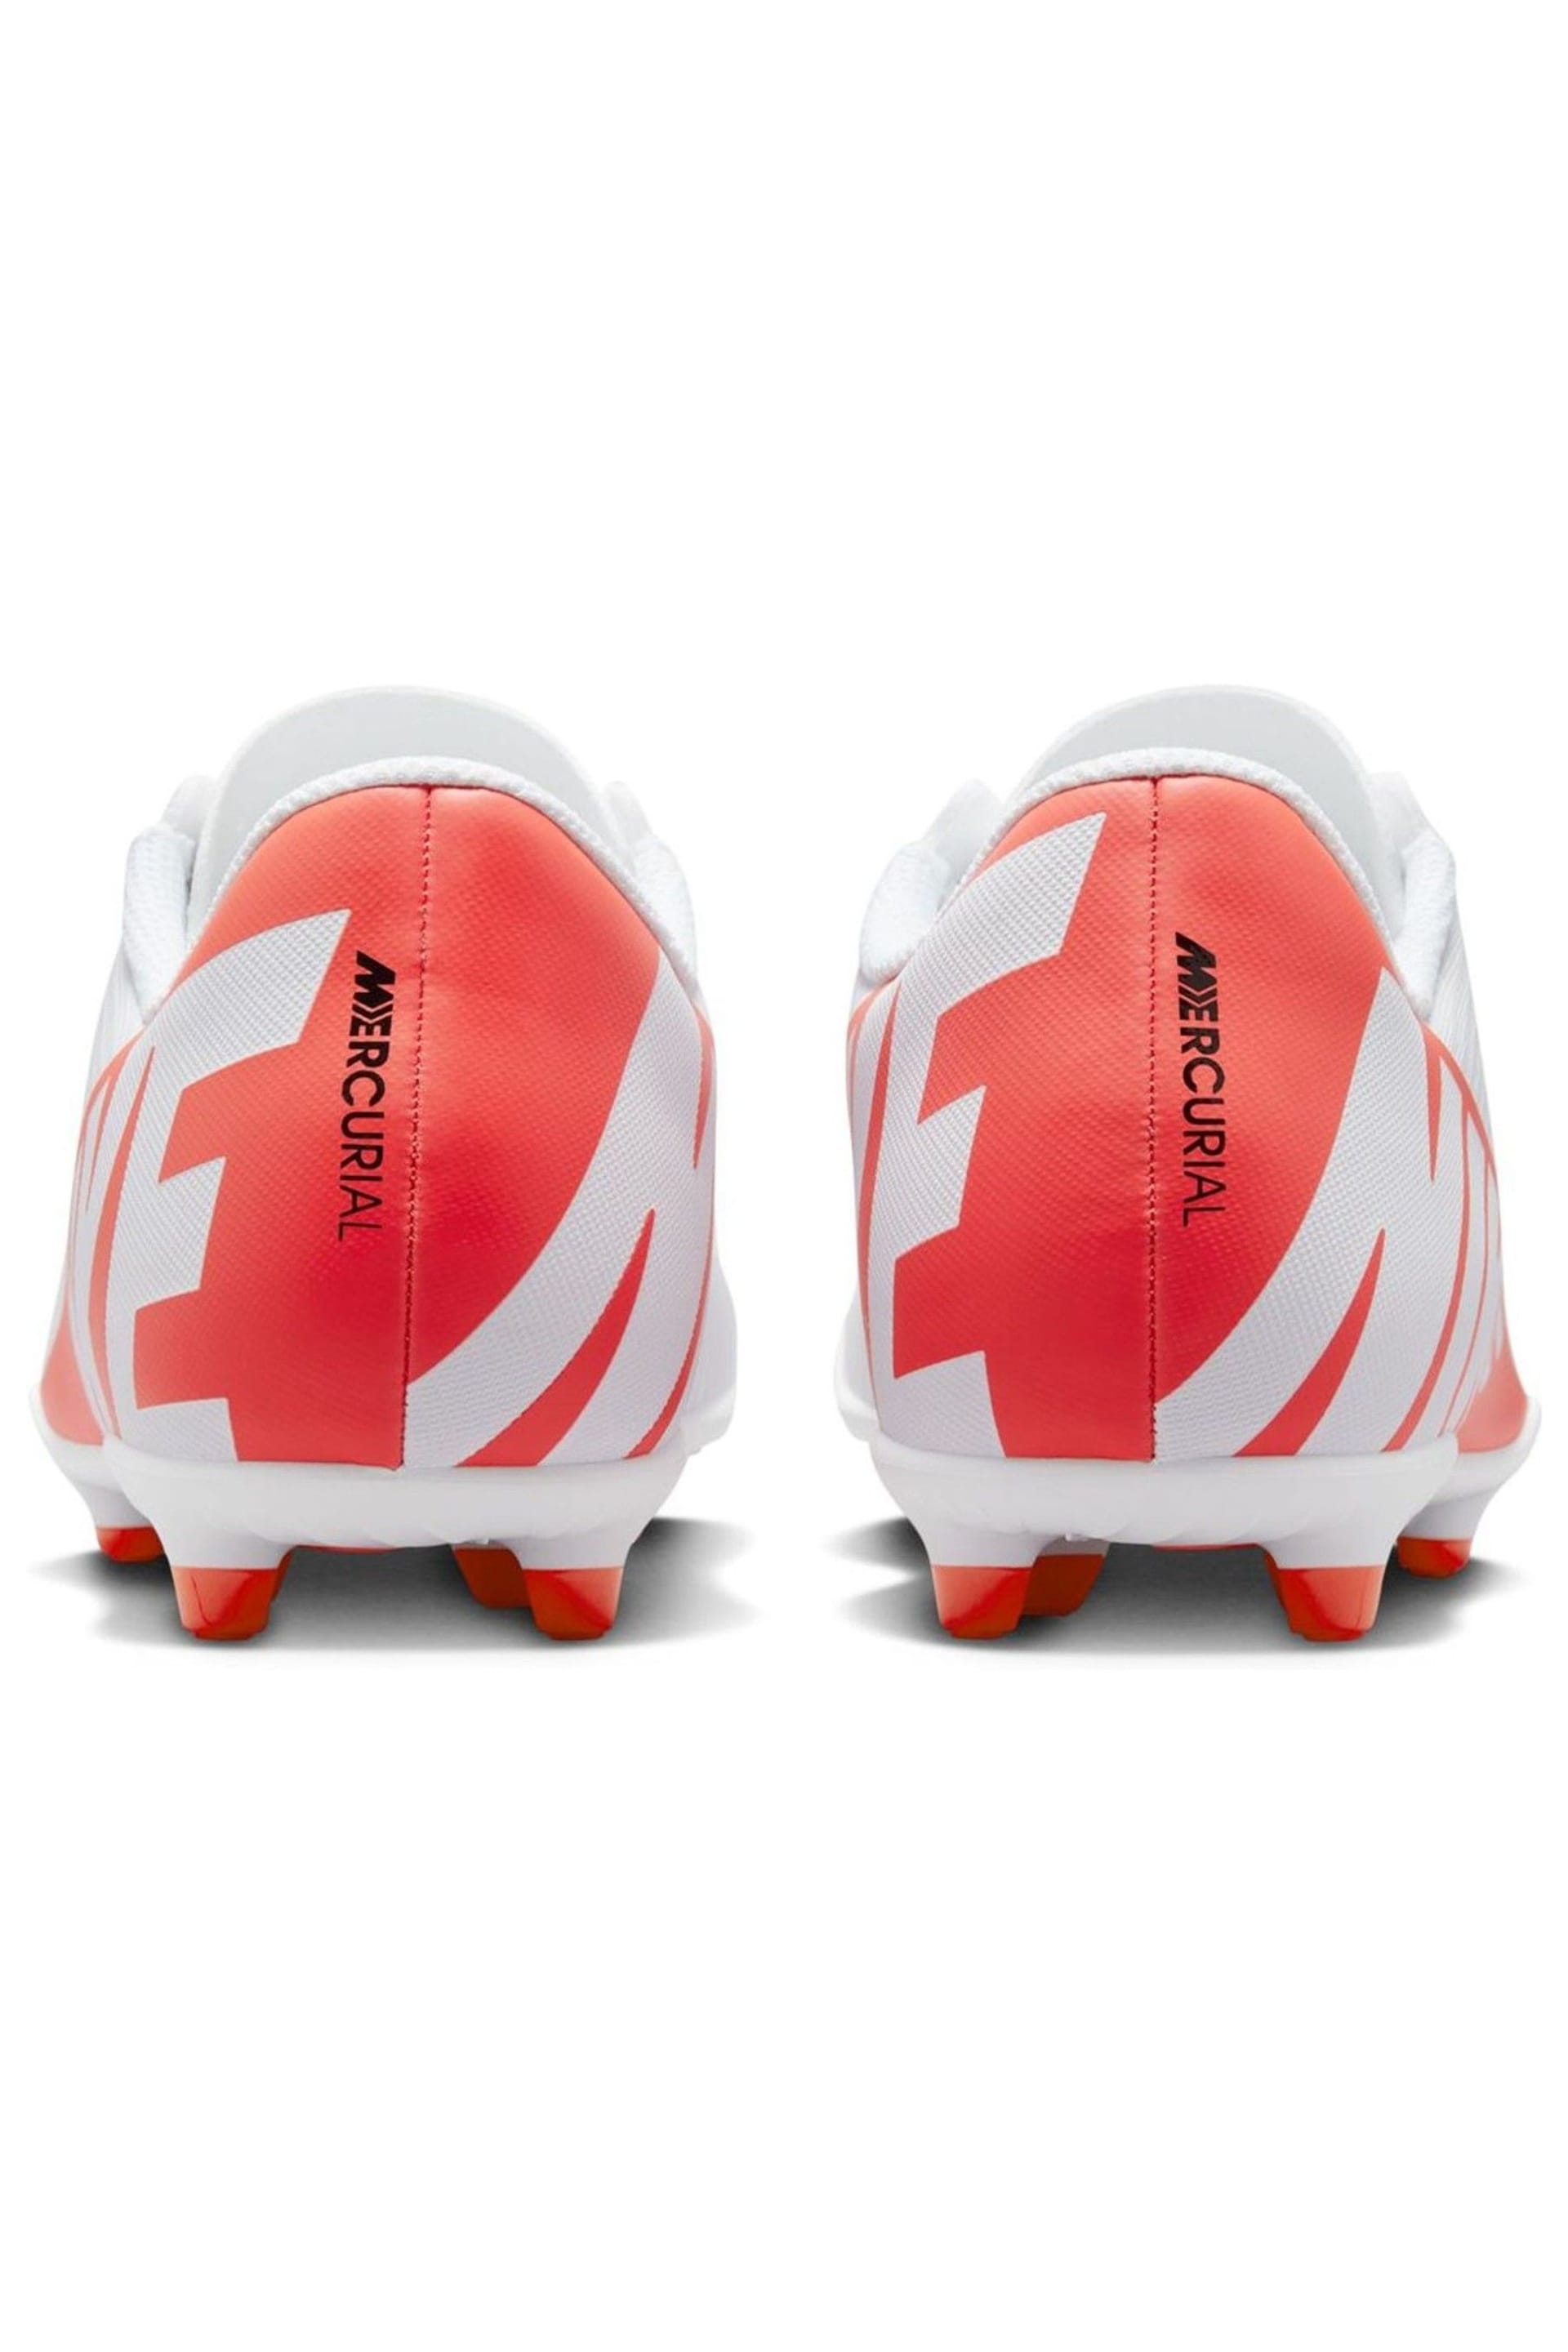 Nike Jr. Red Mercurial Vapor 15 Club Firm Ground Football Boots - Image 8 of 11